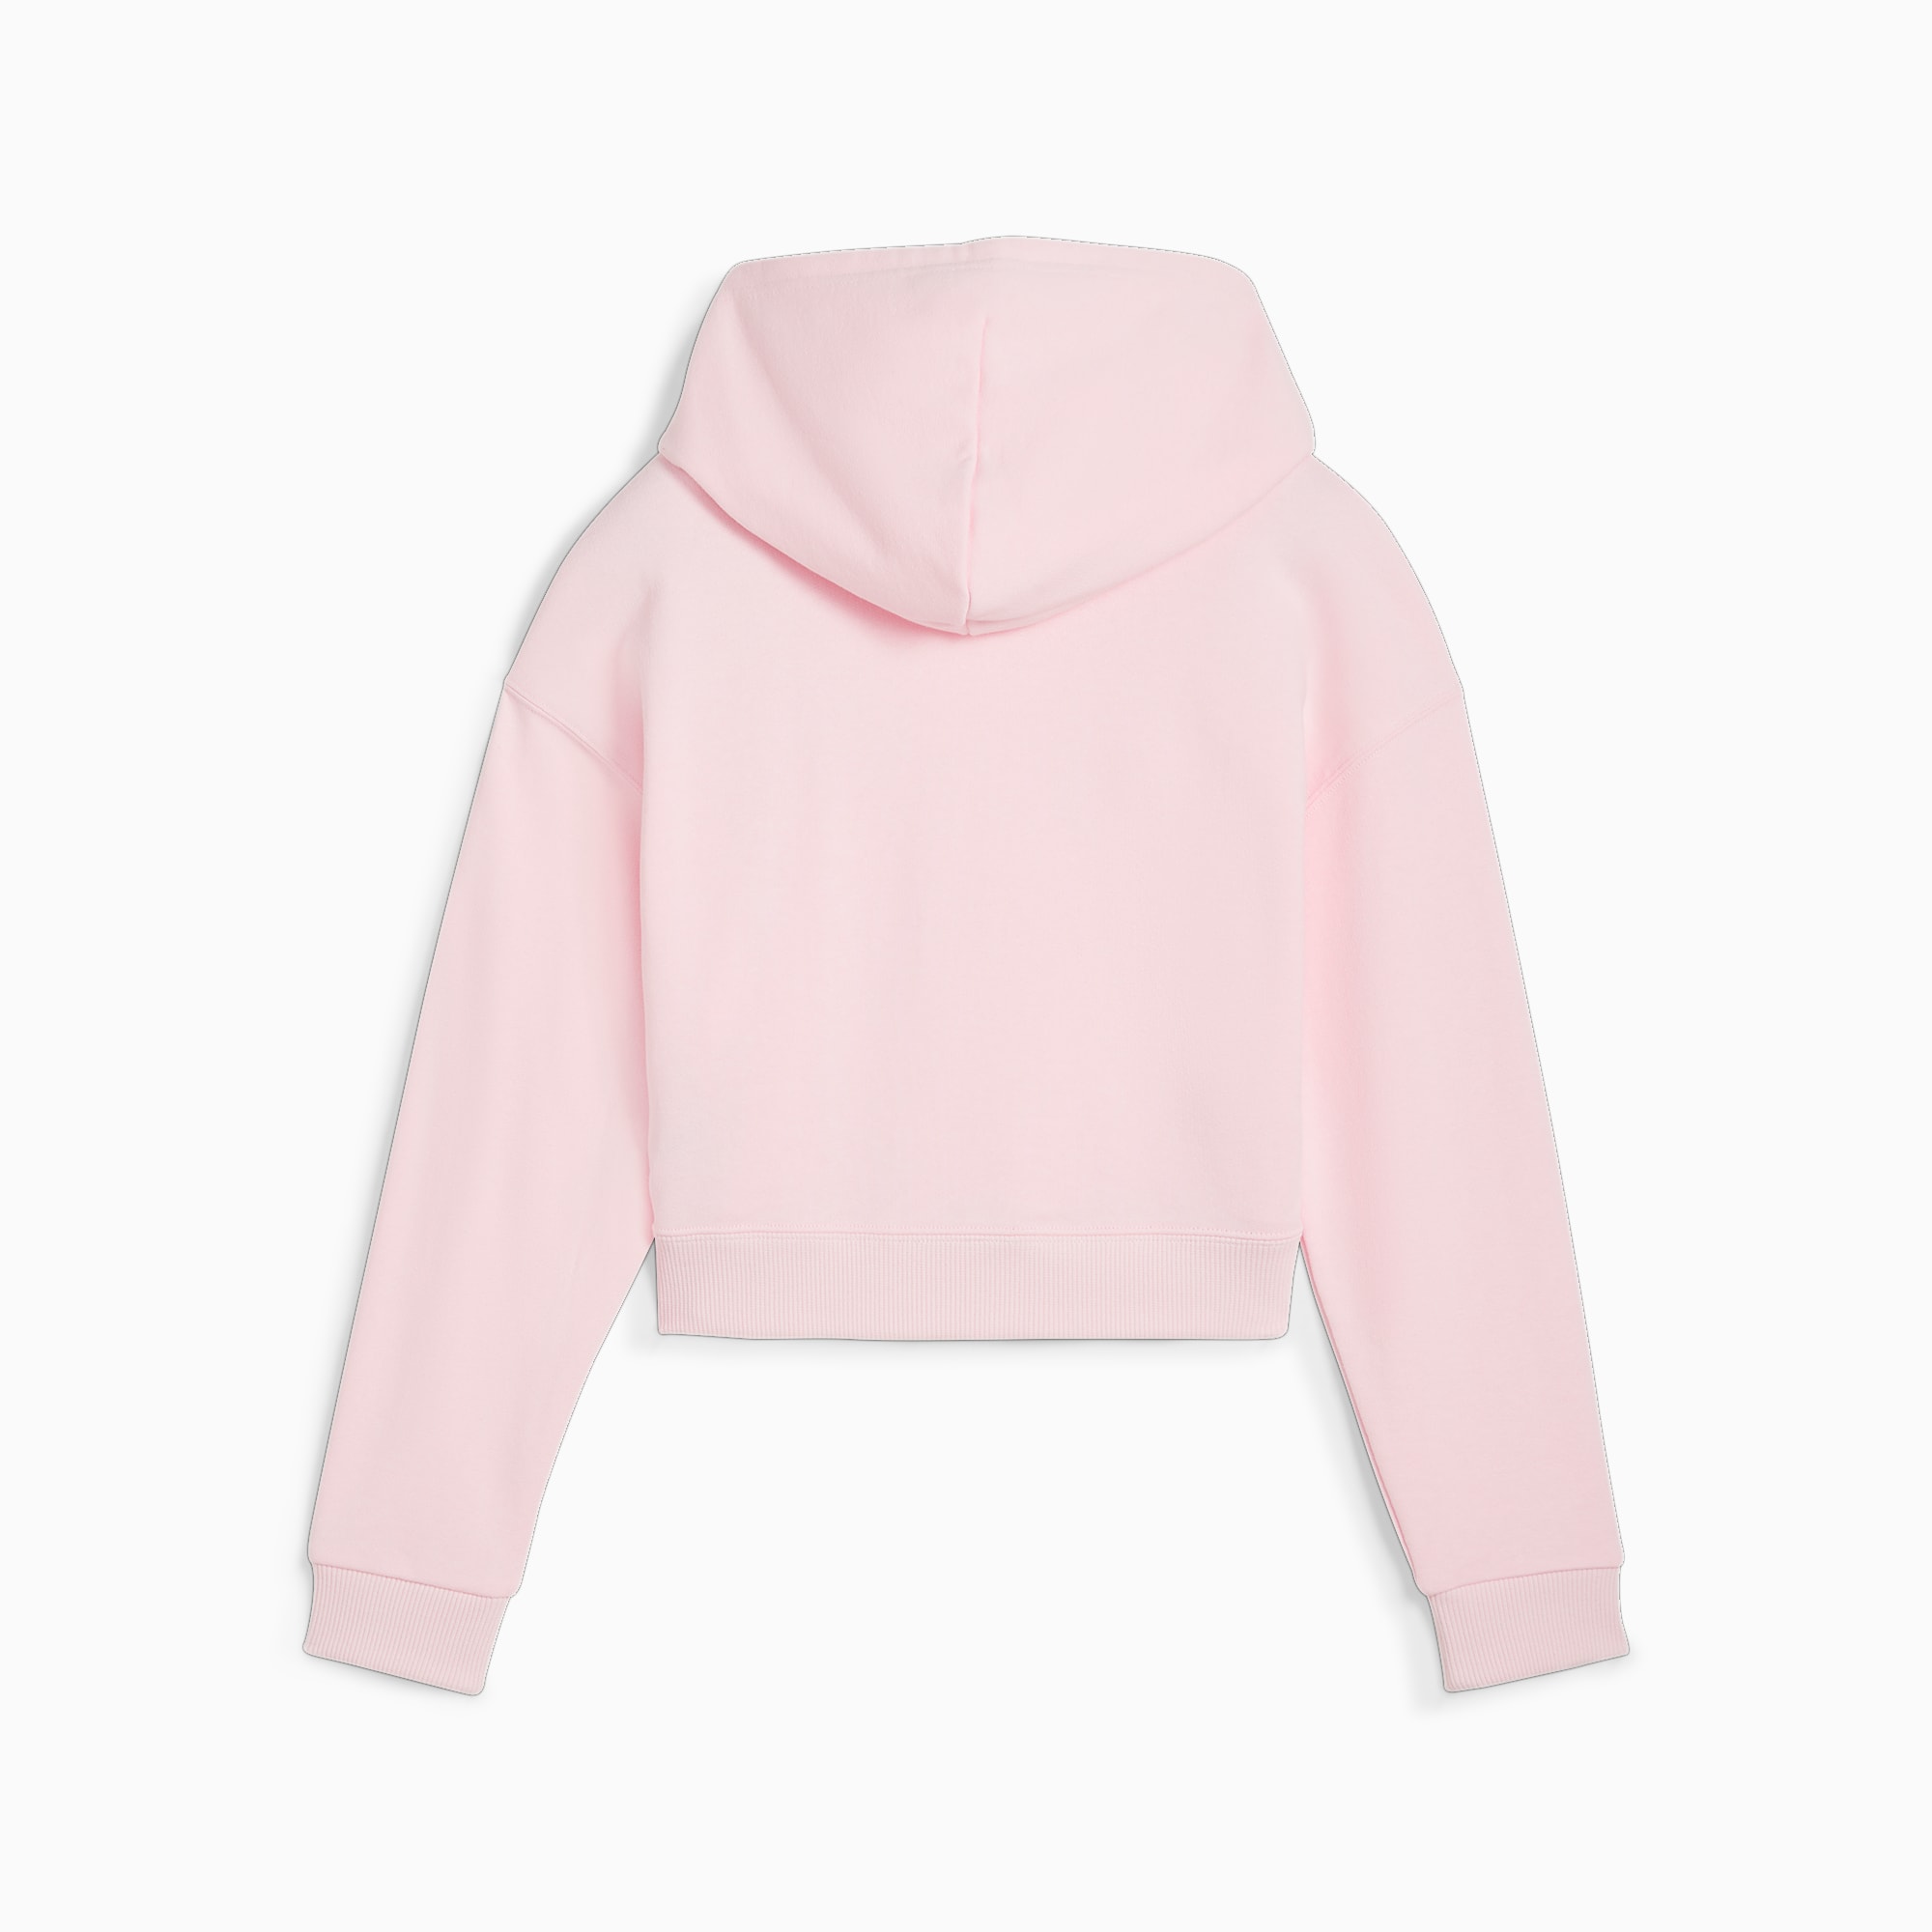 PUMA Better Classics Girls' Hoodie, Whisp Of Pink, Size 128, Clothing